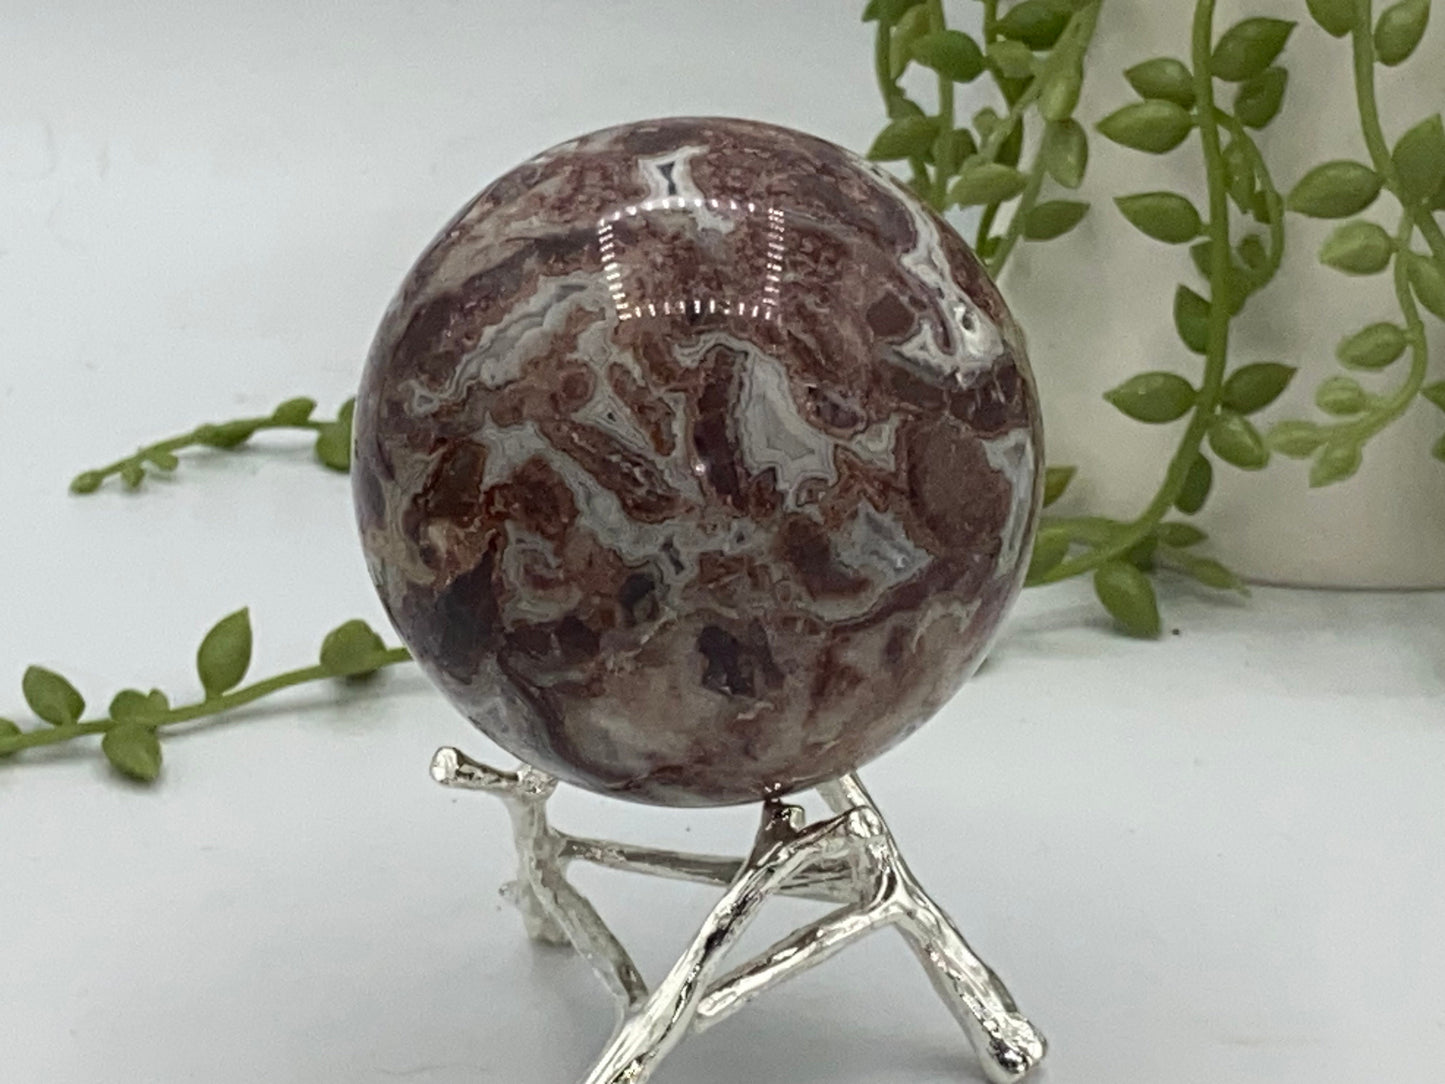 Natural Druzy Polished Mexican Lace Agate Sphere Ball, Banded Agate, Divination Ball, Crystal Heal, Chakra, Crystal Gift, Mineral Specimen